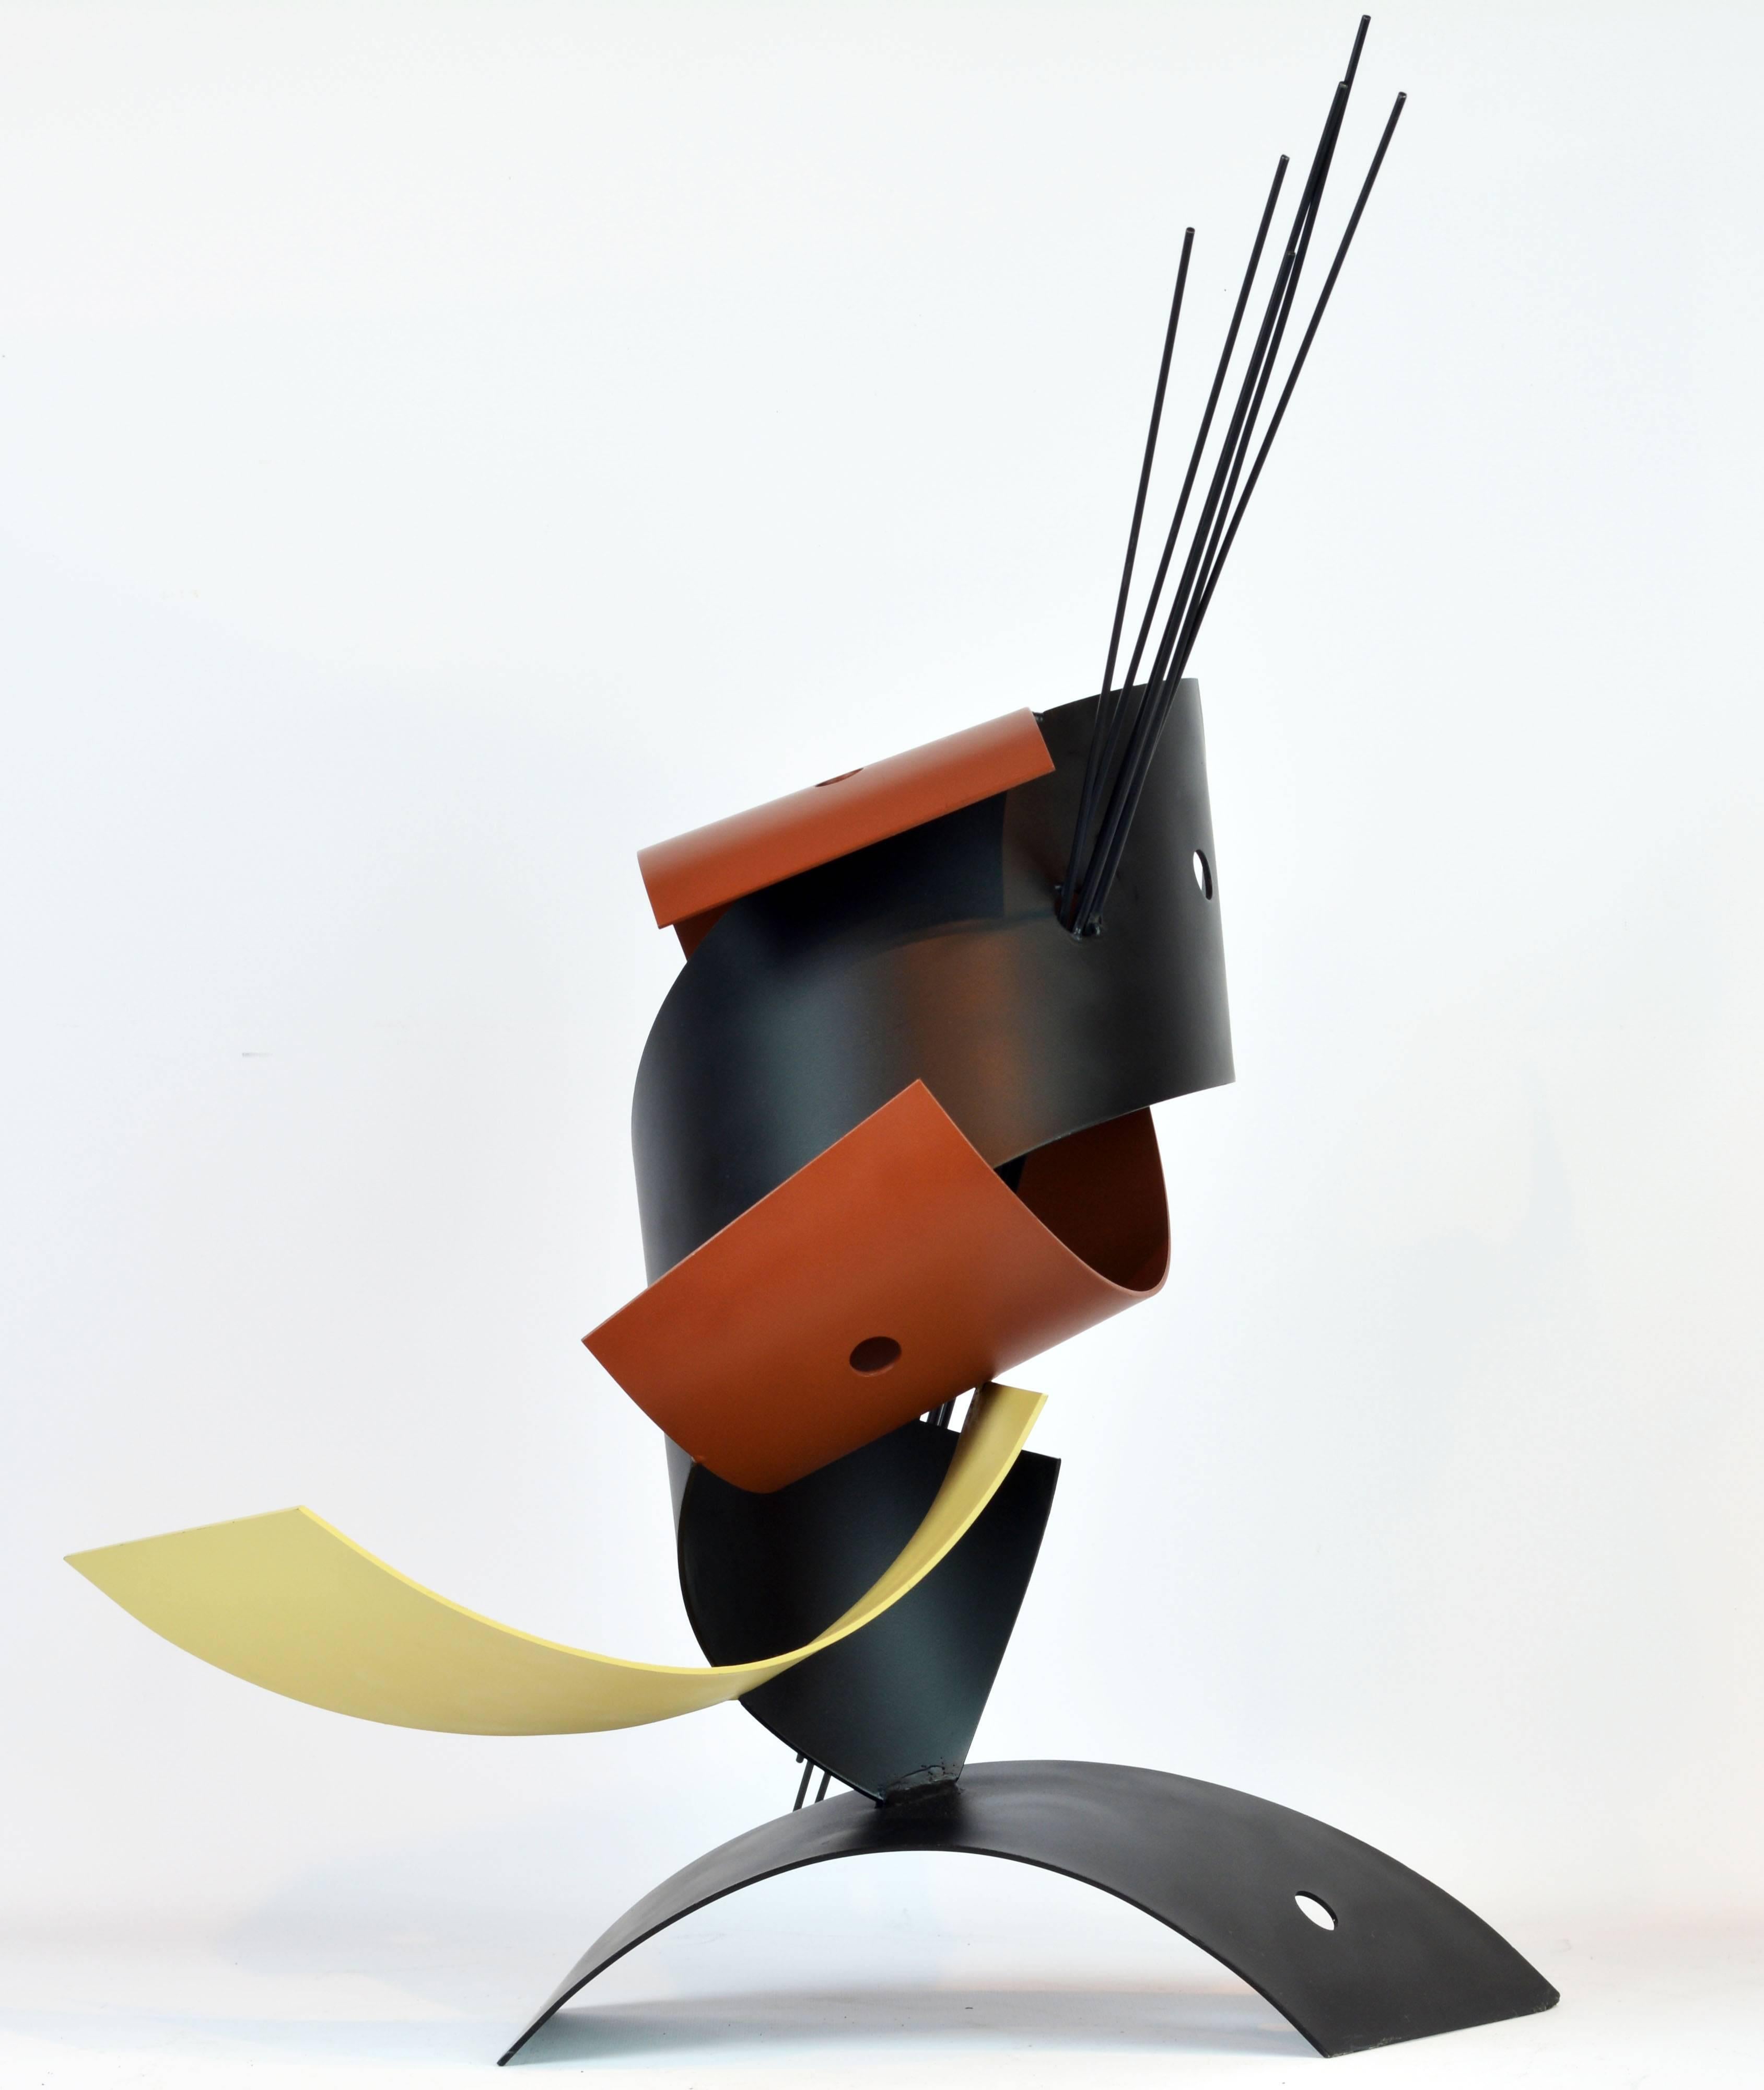 Standing 28 inches tall this sculpture combines curved elements of lacquered steel with a group of steel rods into a composition of great sophistication that changes every time the viewer moves. 

Curtis Jere is a compound nom-de-plume of artists